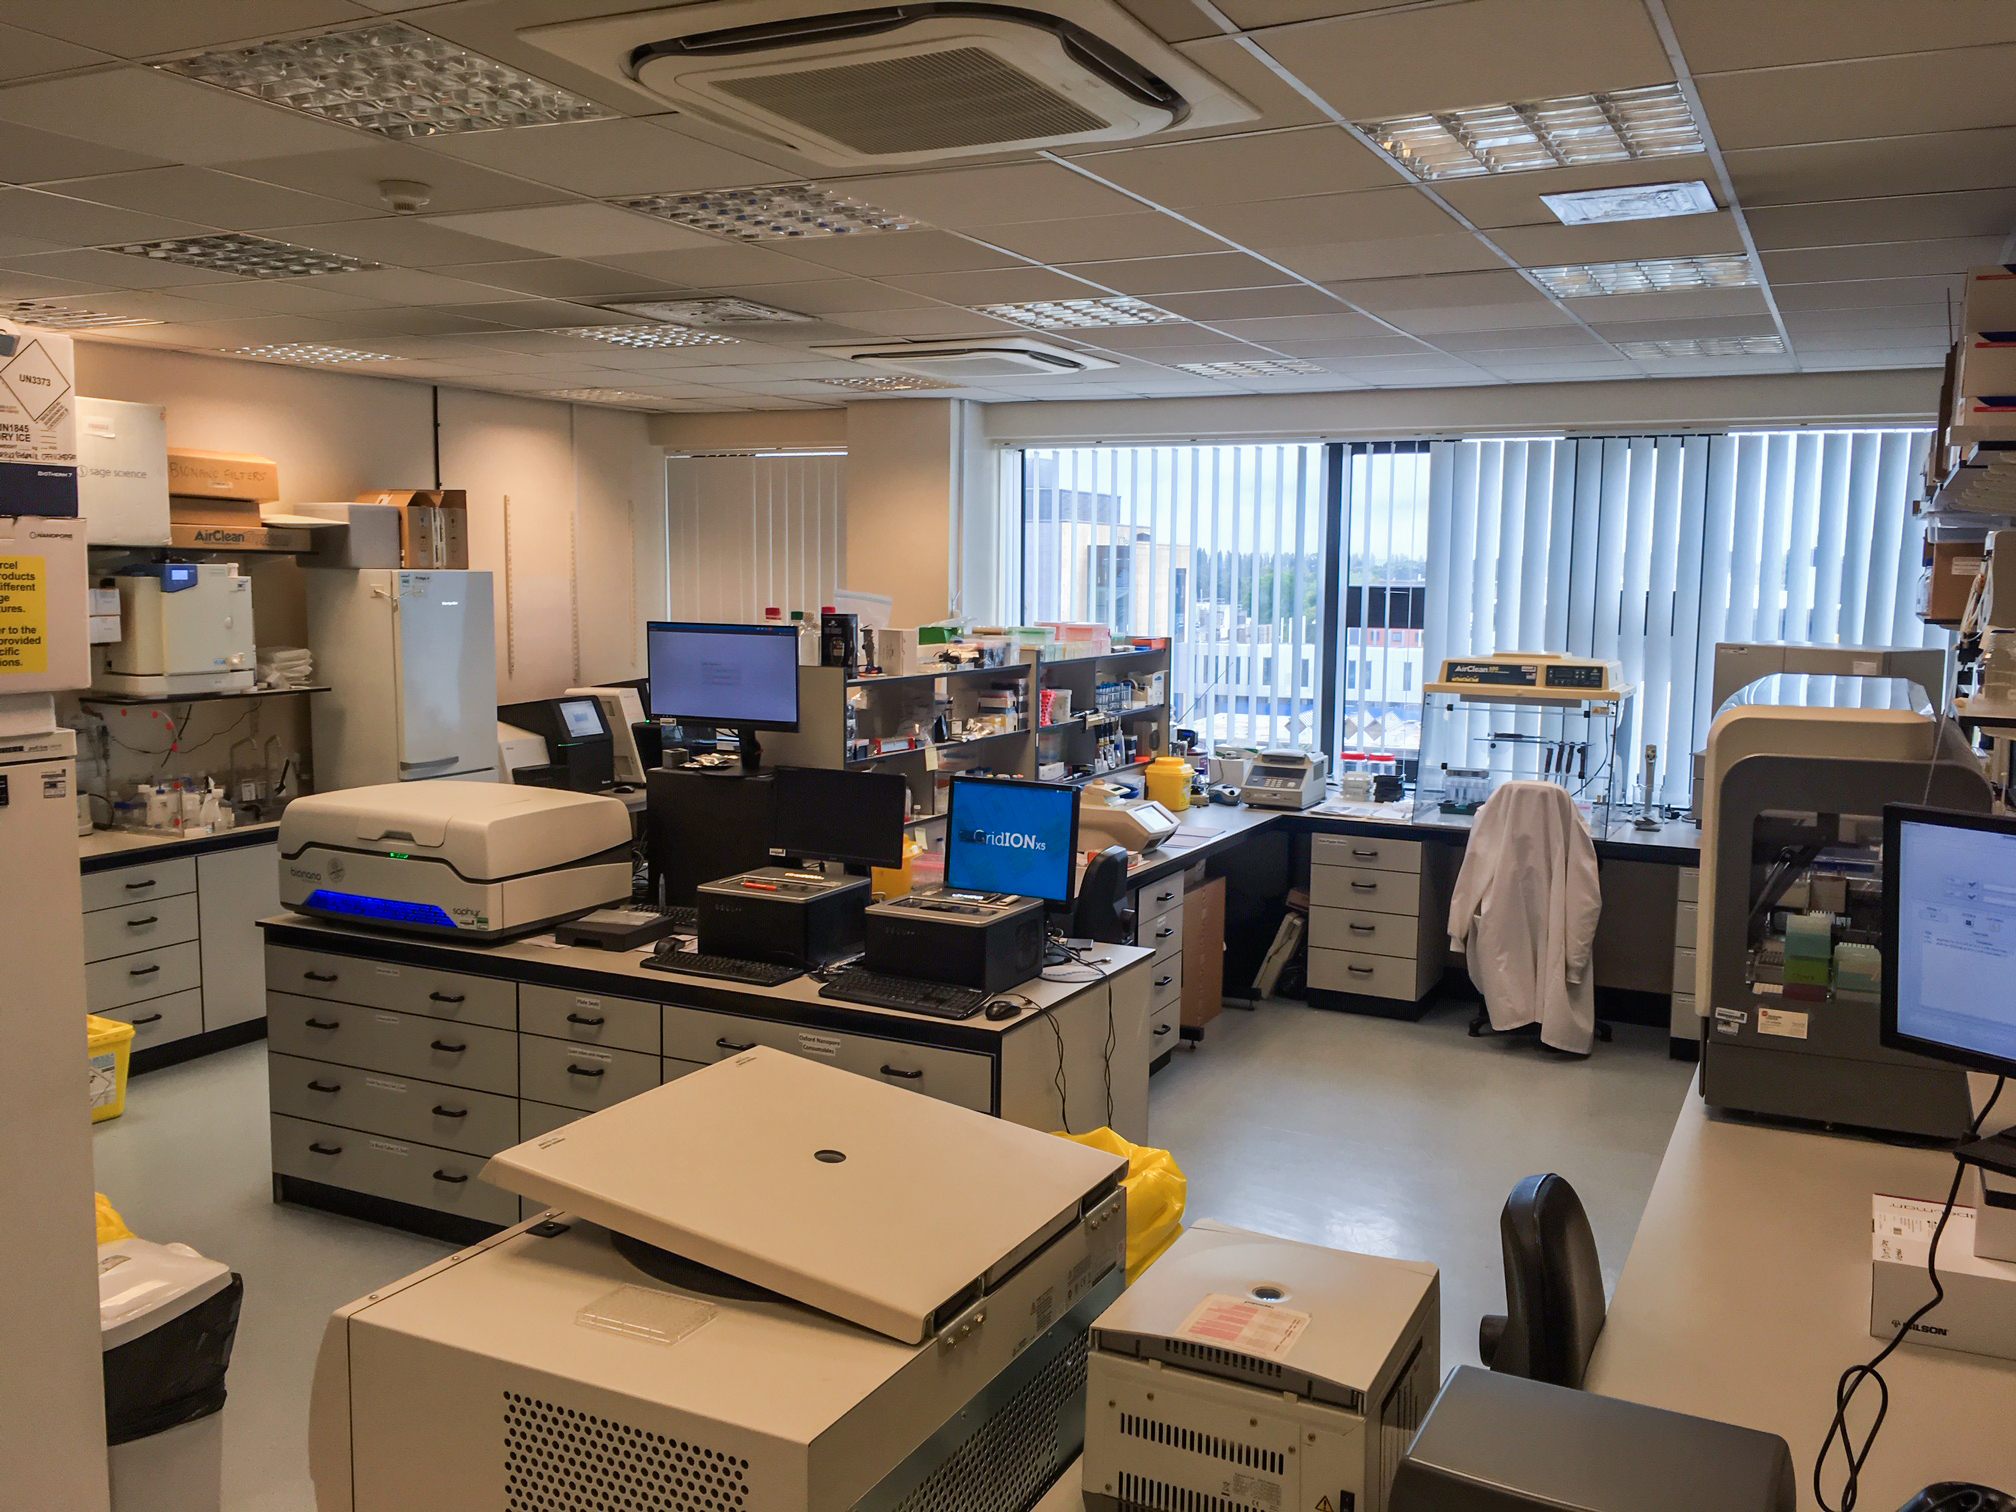 The genomics laboratory, Deep Seq, features equipment to help researchers gain long reads of DNA